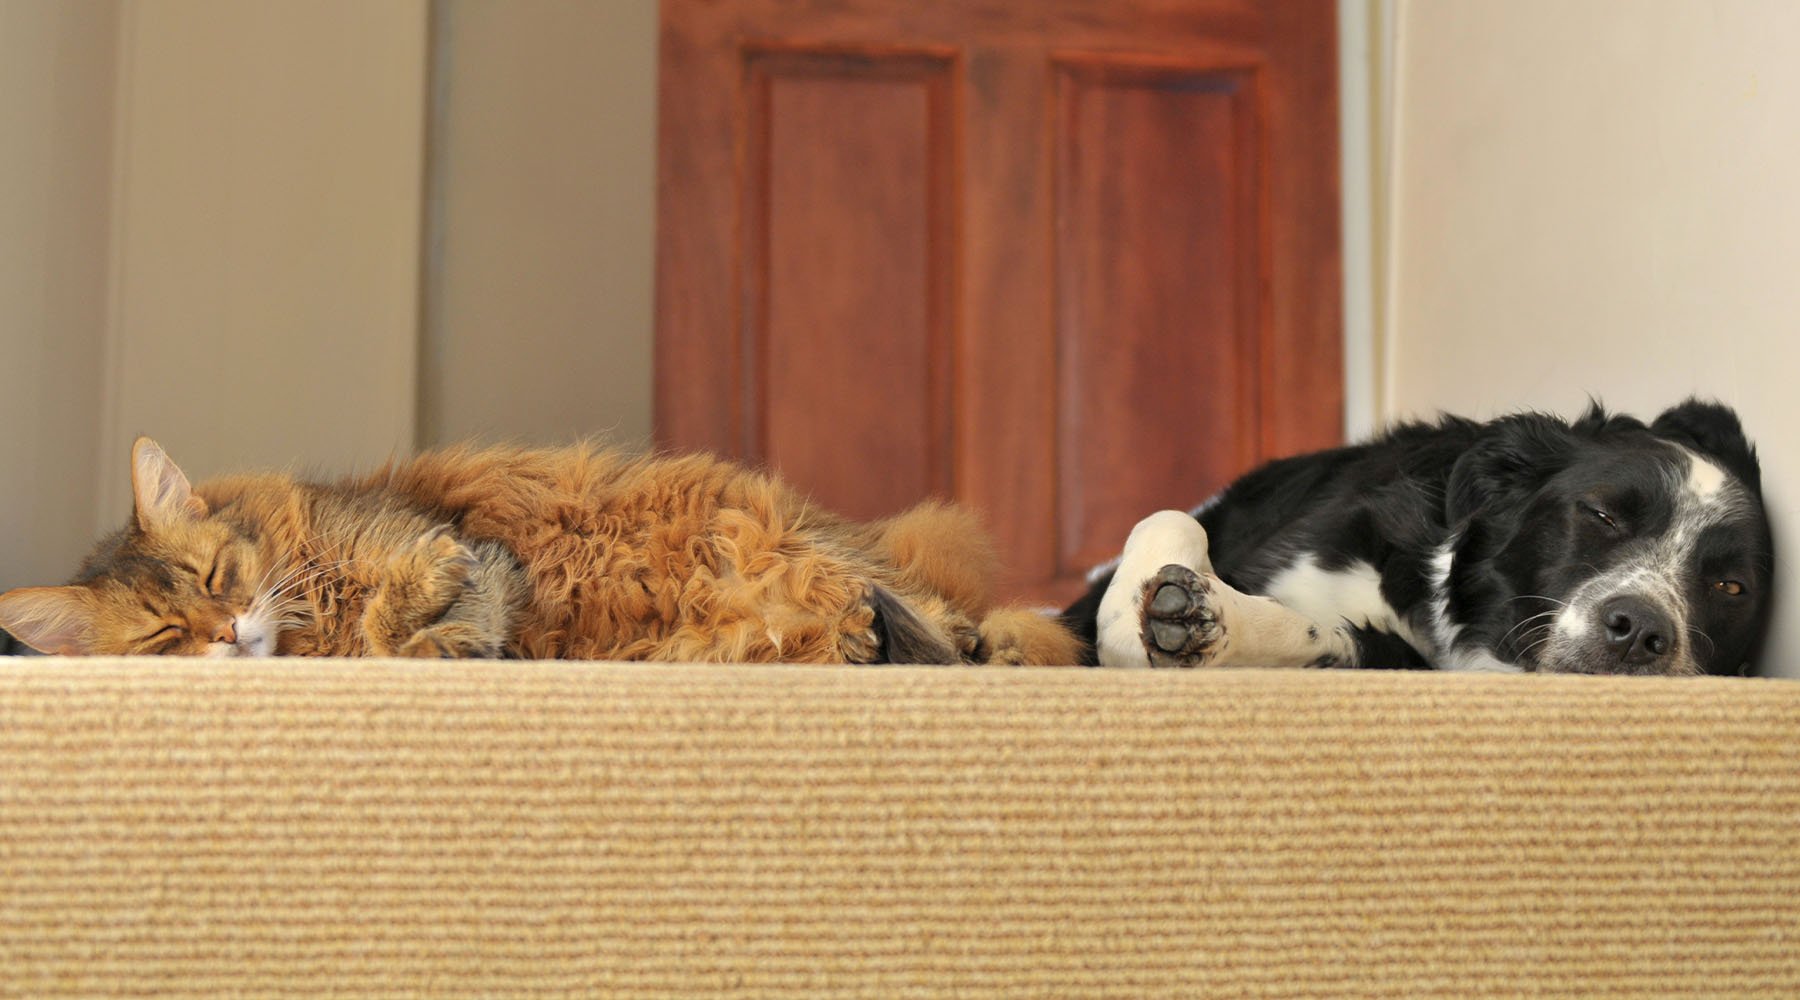 Dog and cat napping indoors